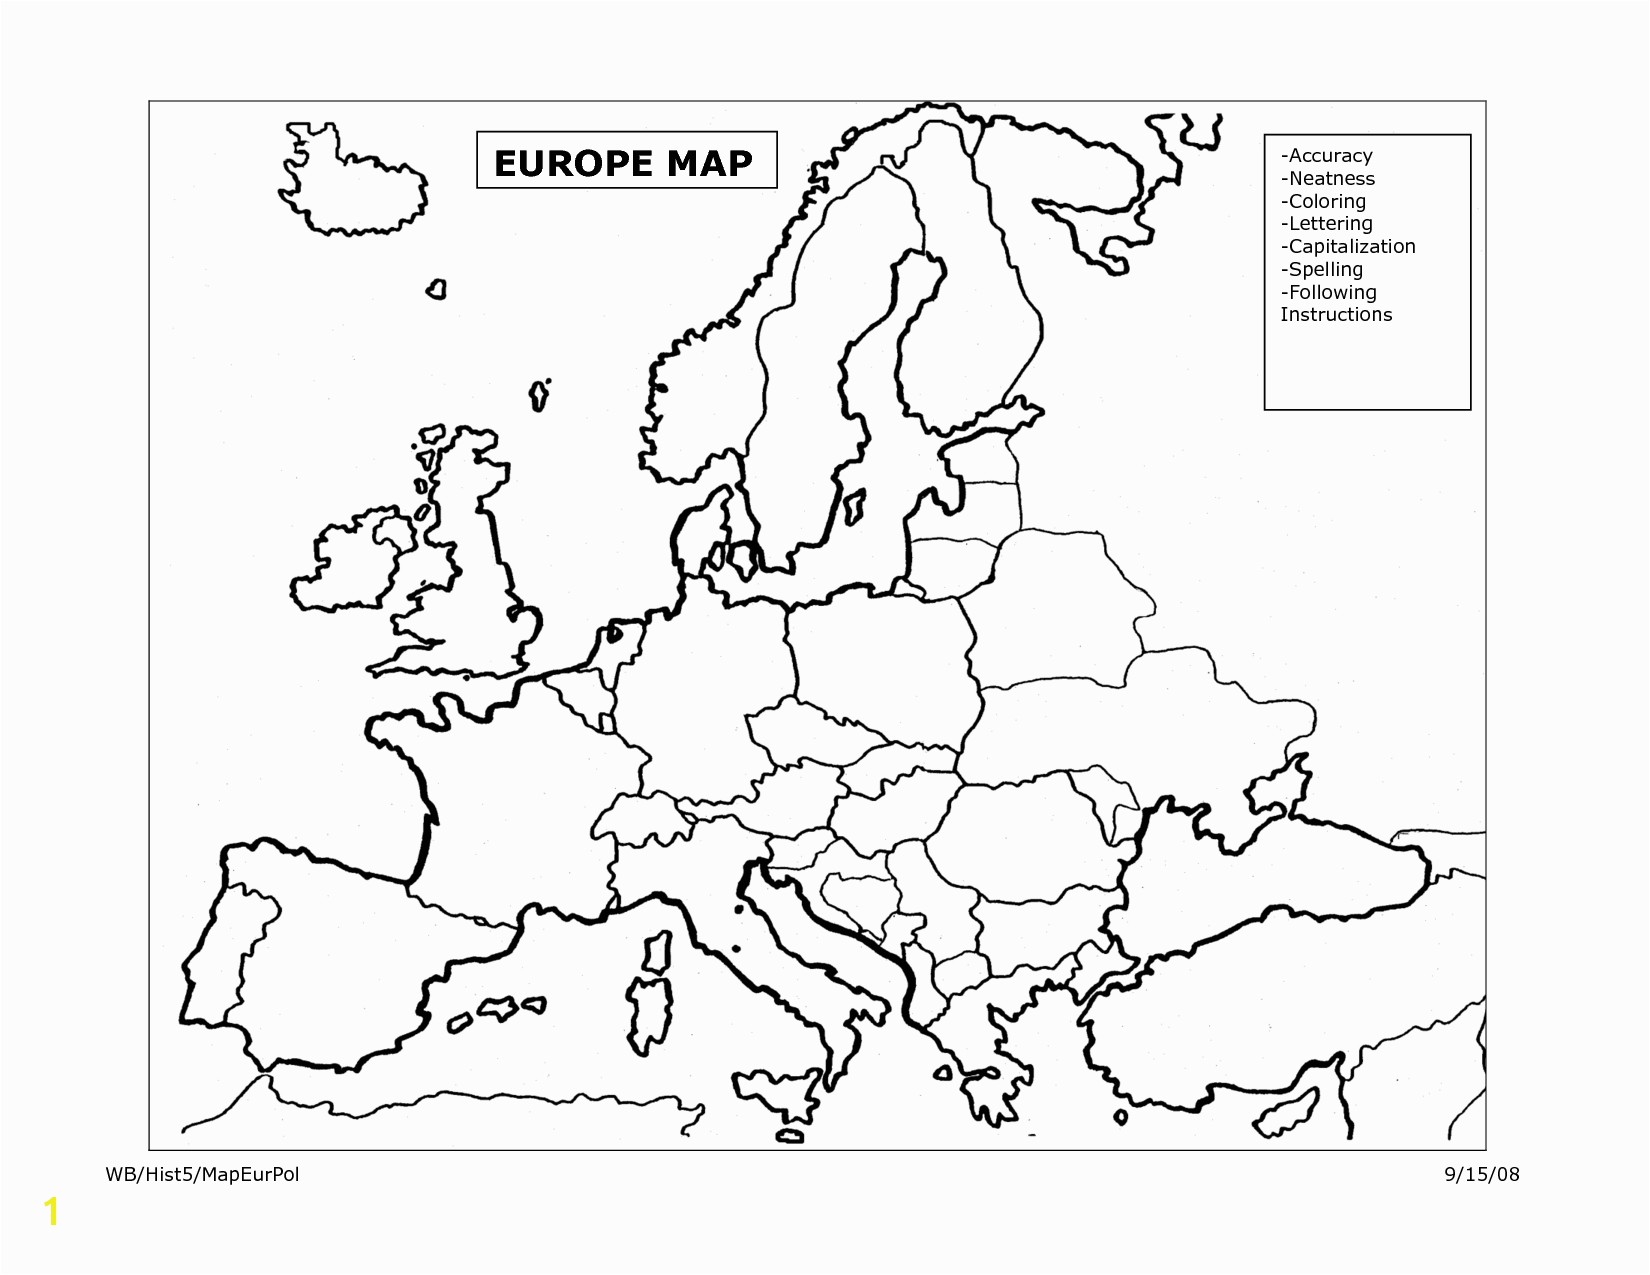 Flags Of Europe Coloring Pages S Coloring Page Ncsudan org S Collections Coloring Page 2018